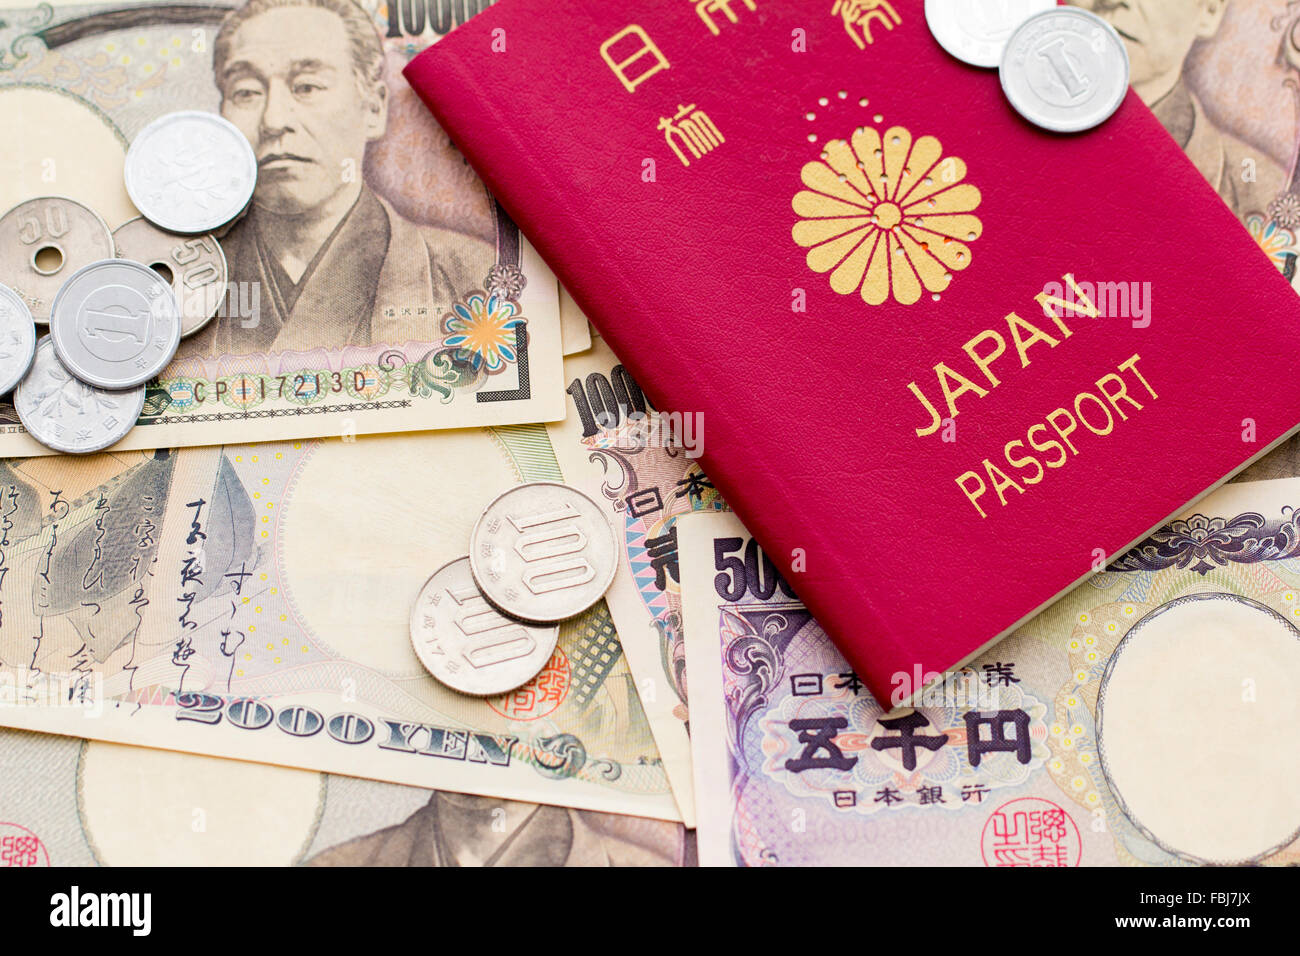 Travel, money and currency. Red Japanese passport on top of scattered various domination Japanese yen banknotes and some small change, coins, on top. Stock Photo